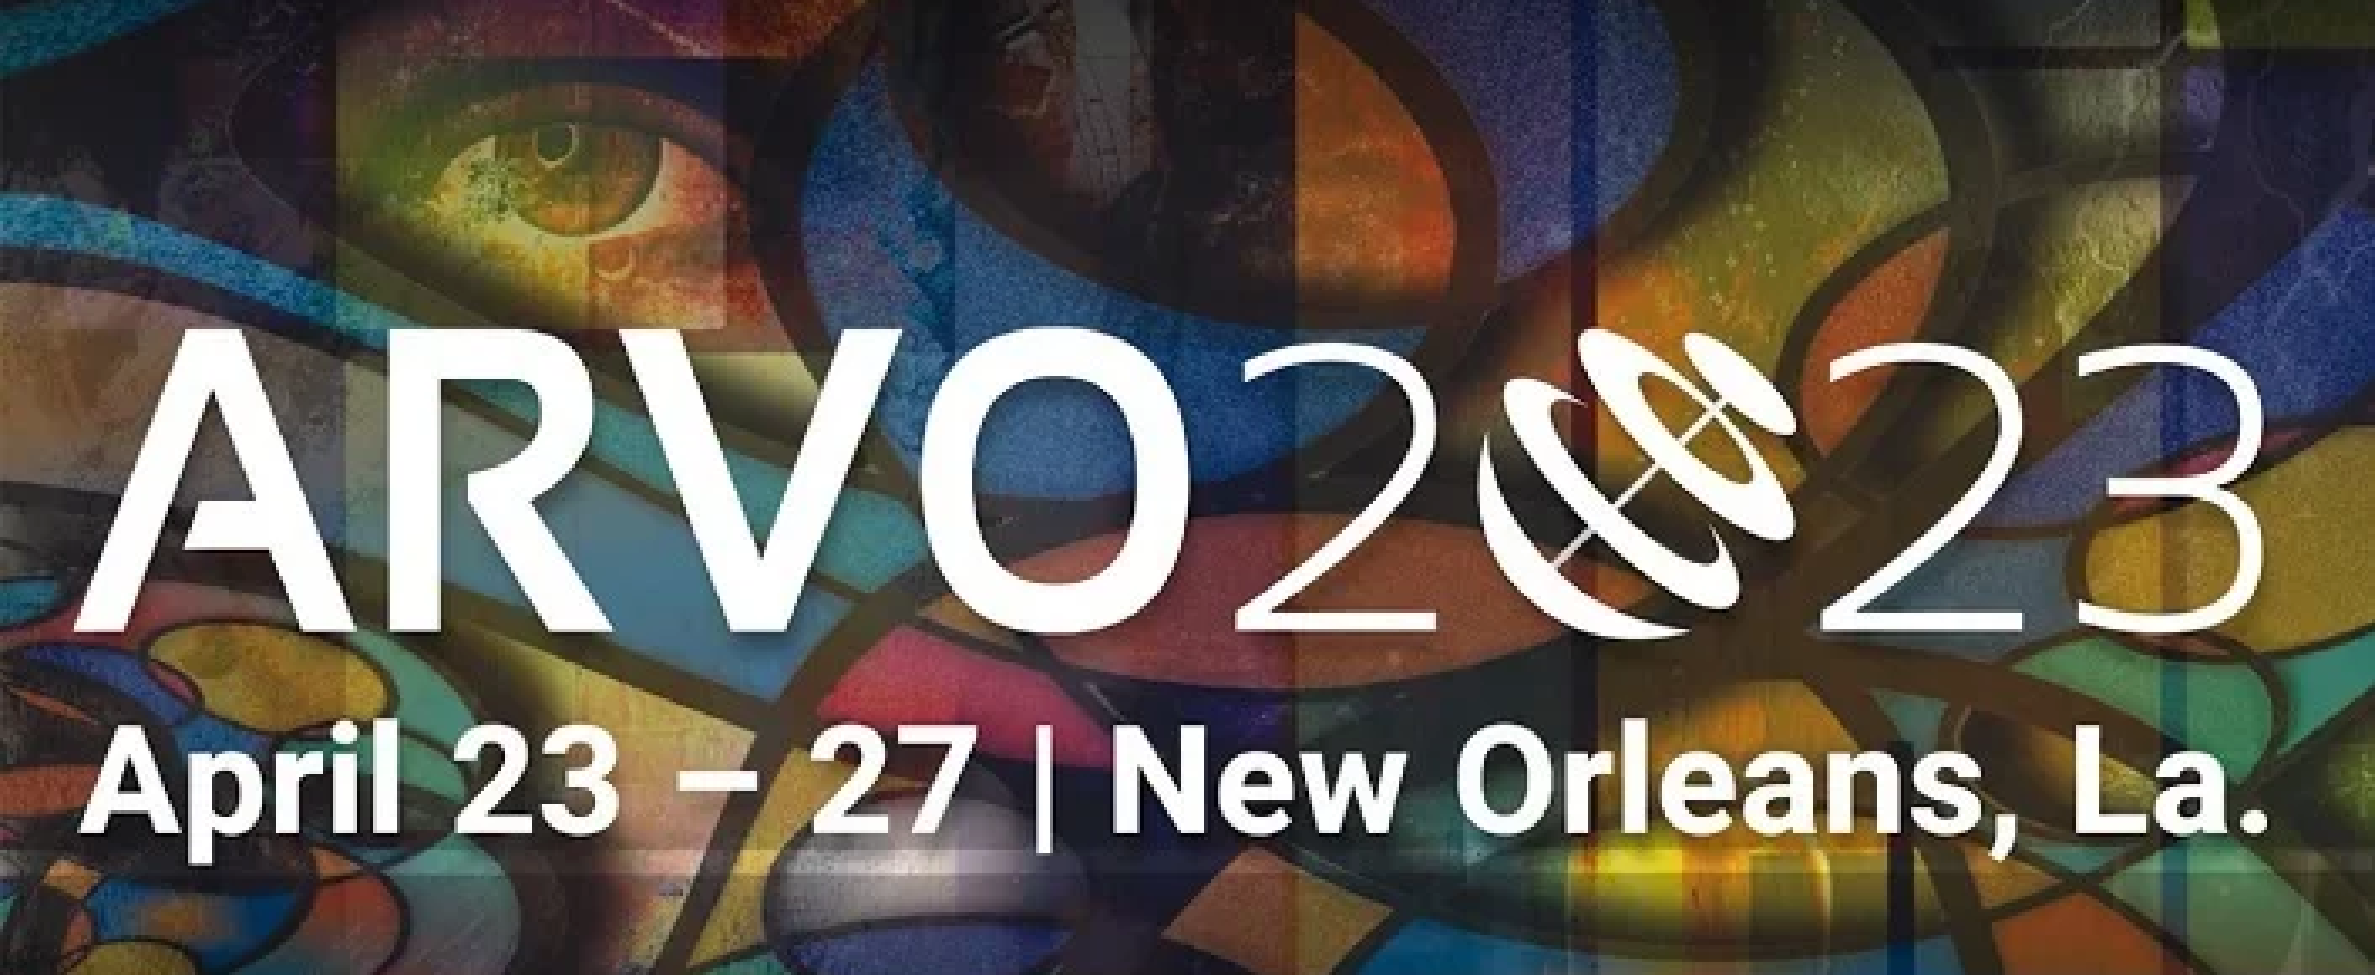 Association for Research in Vision and Ophthalmology Annual Meeting - ARVO 2023